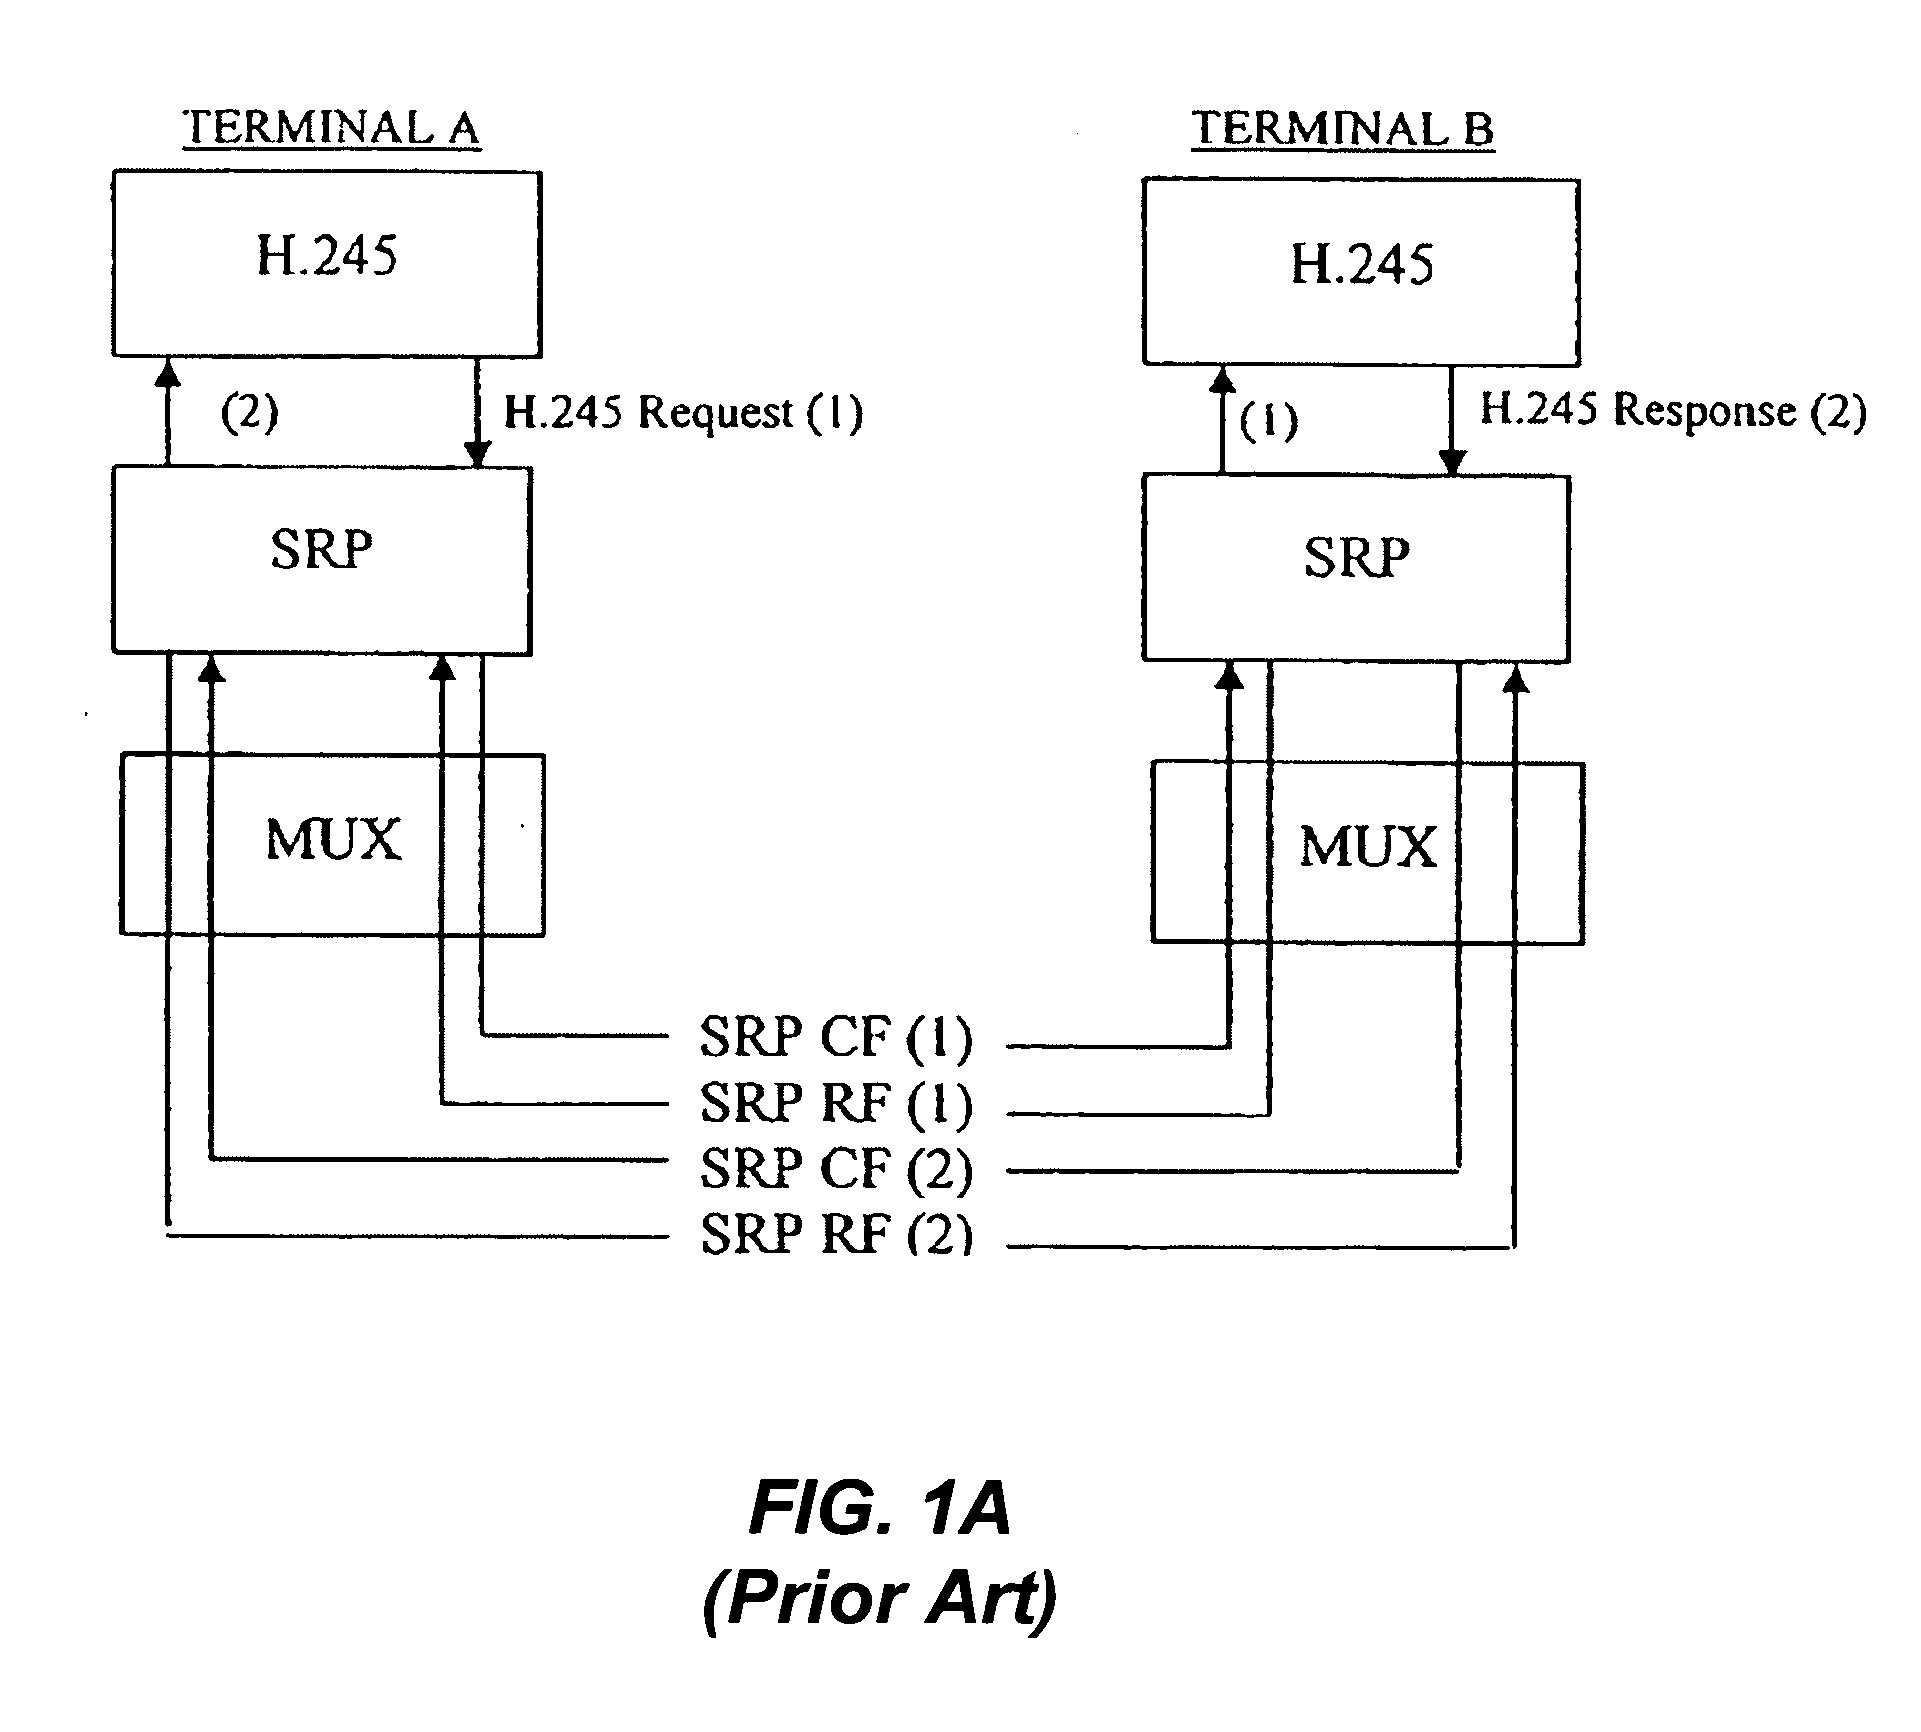 Methods and system for fast session establishment between equipment using H.324 and related telecommunications protocols